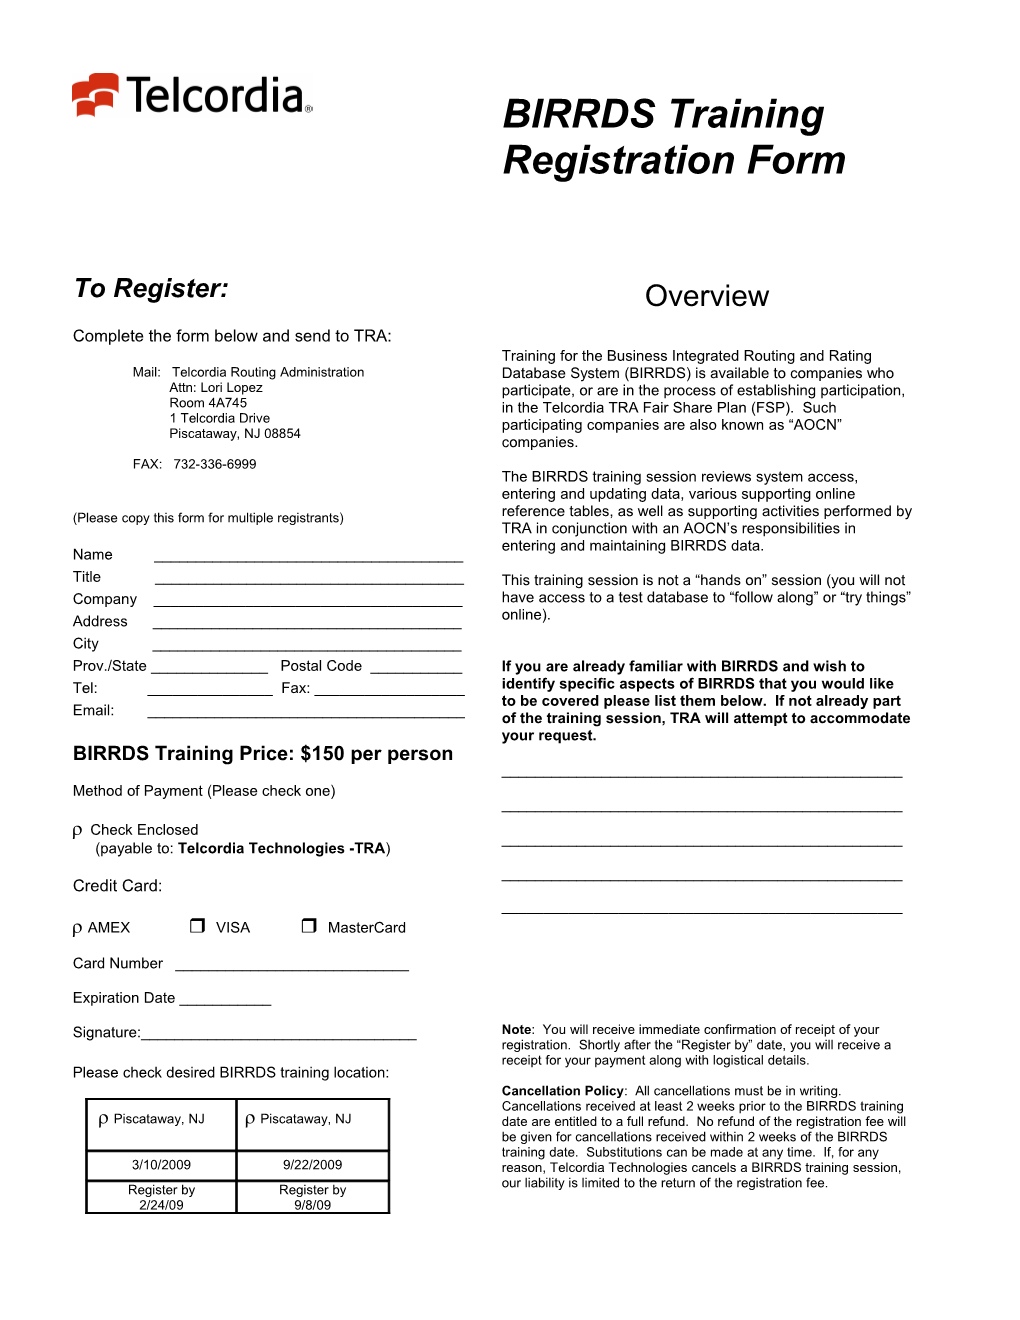 Complete the Form Below and Send to TRA